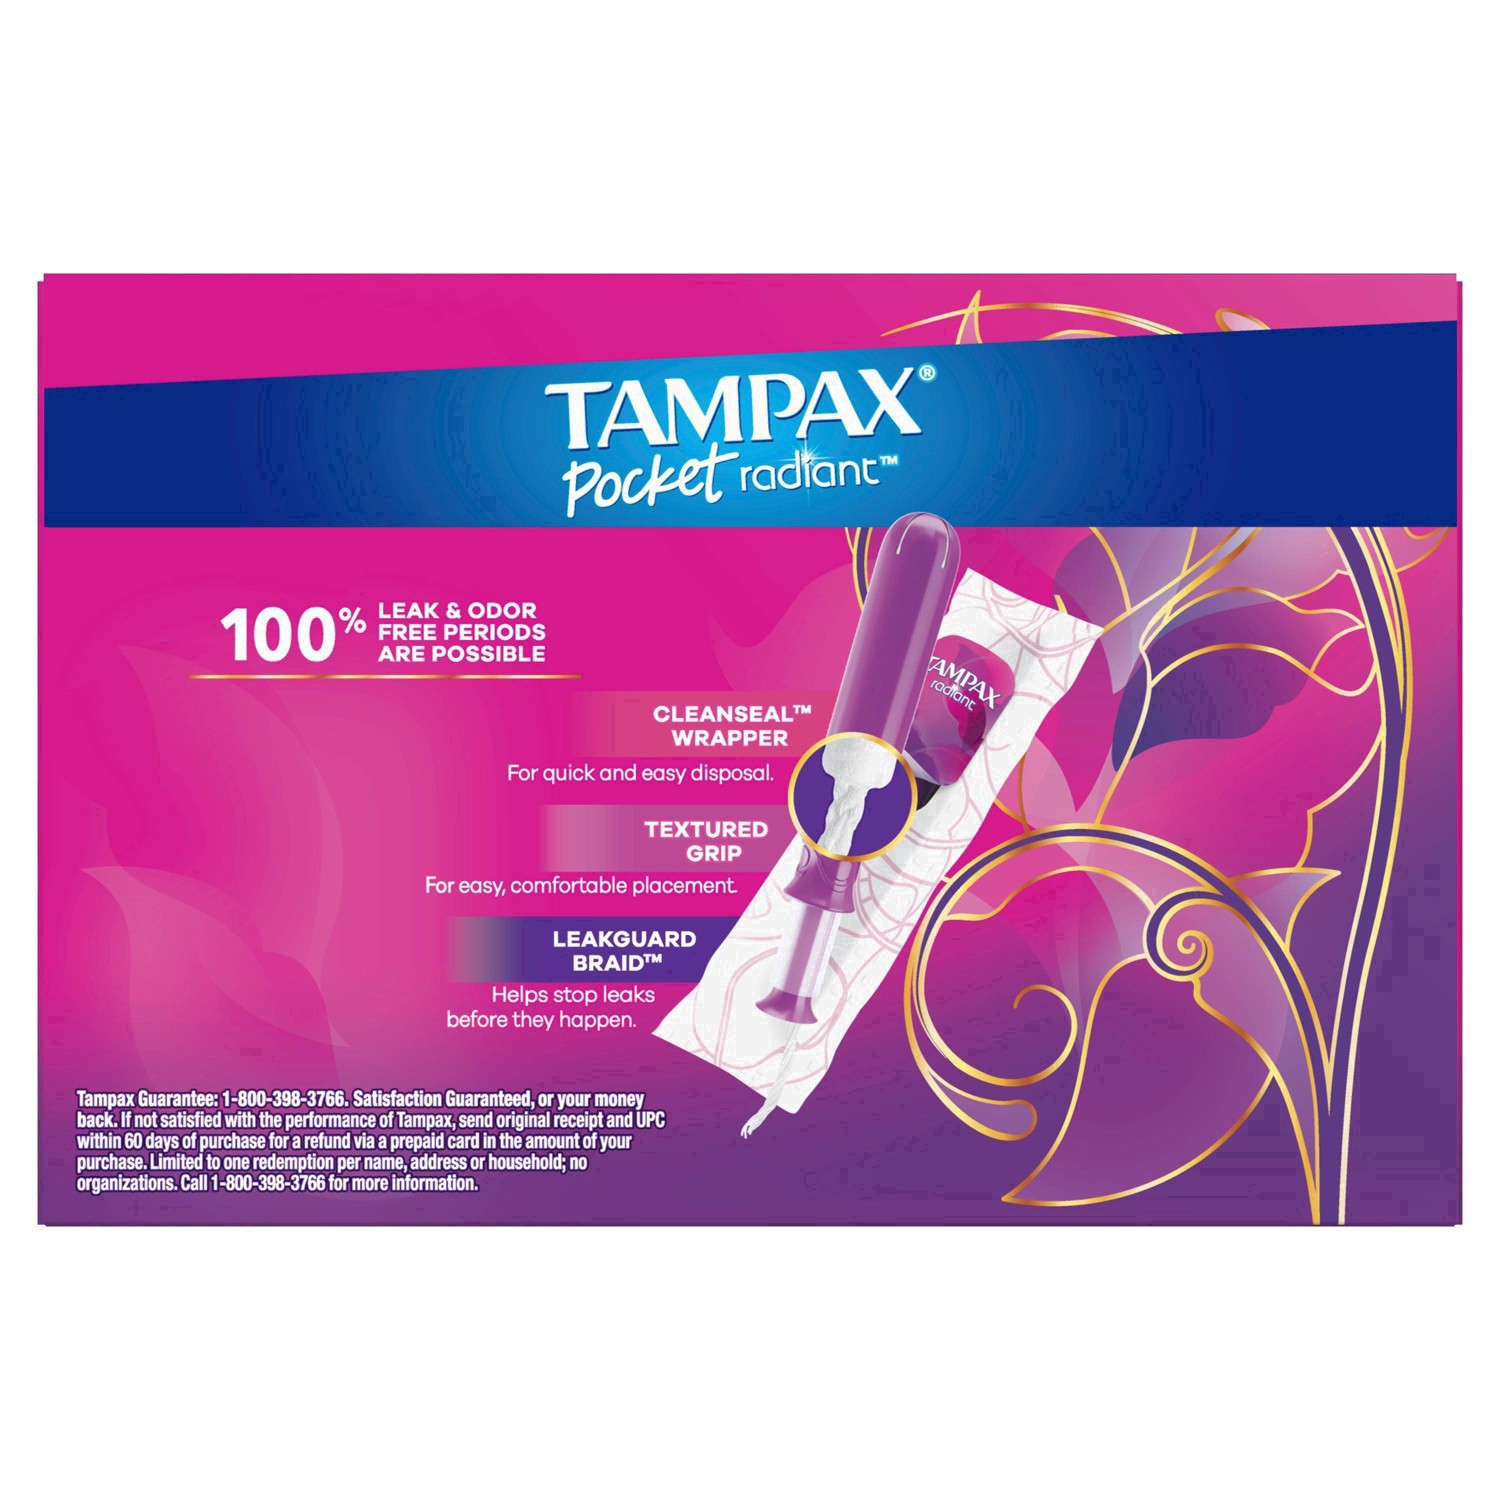 slide 87 of 94, Tampax Pocket Radiant Compact Plastic Tampons, With LeakGuard Braid, Super Absorbency, Unscented, 28 Count, 28 ct